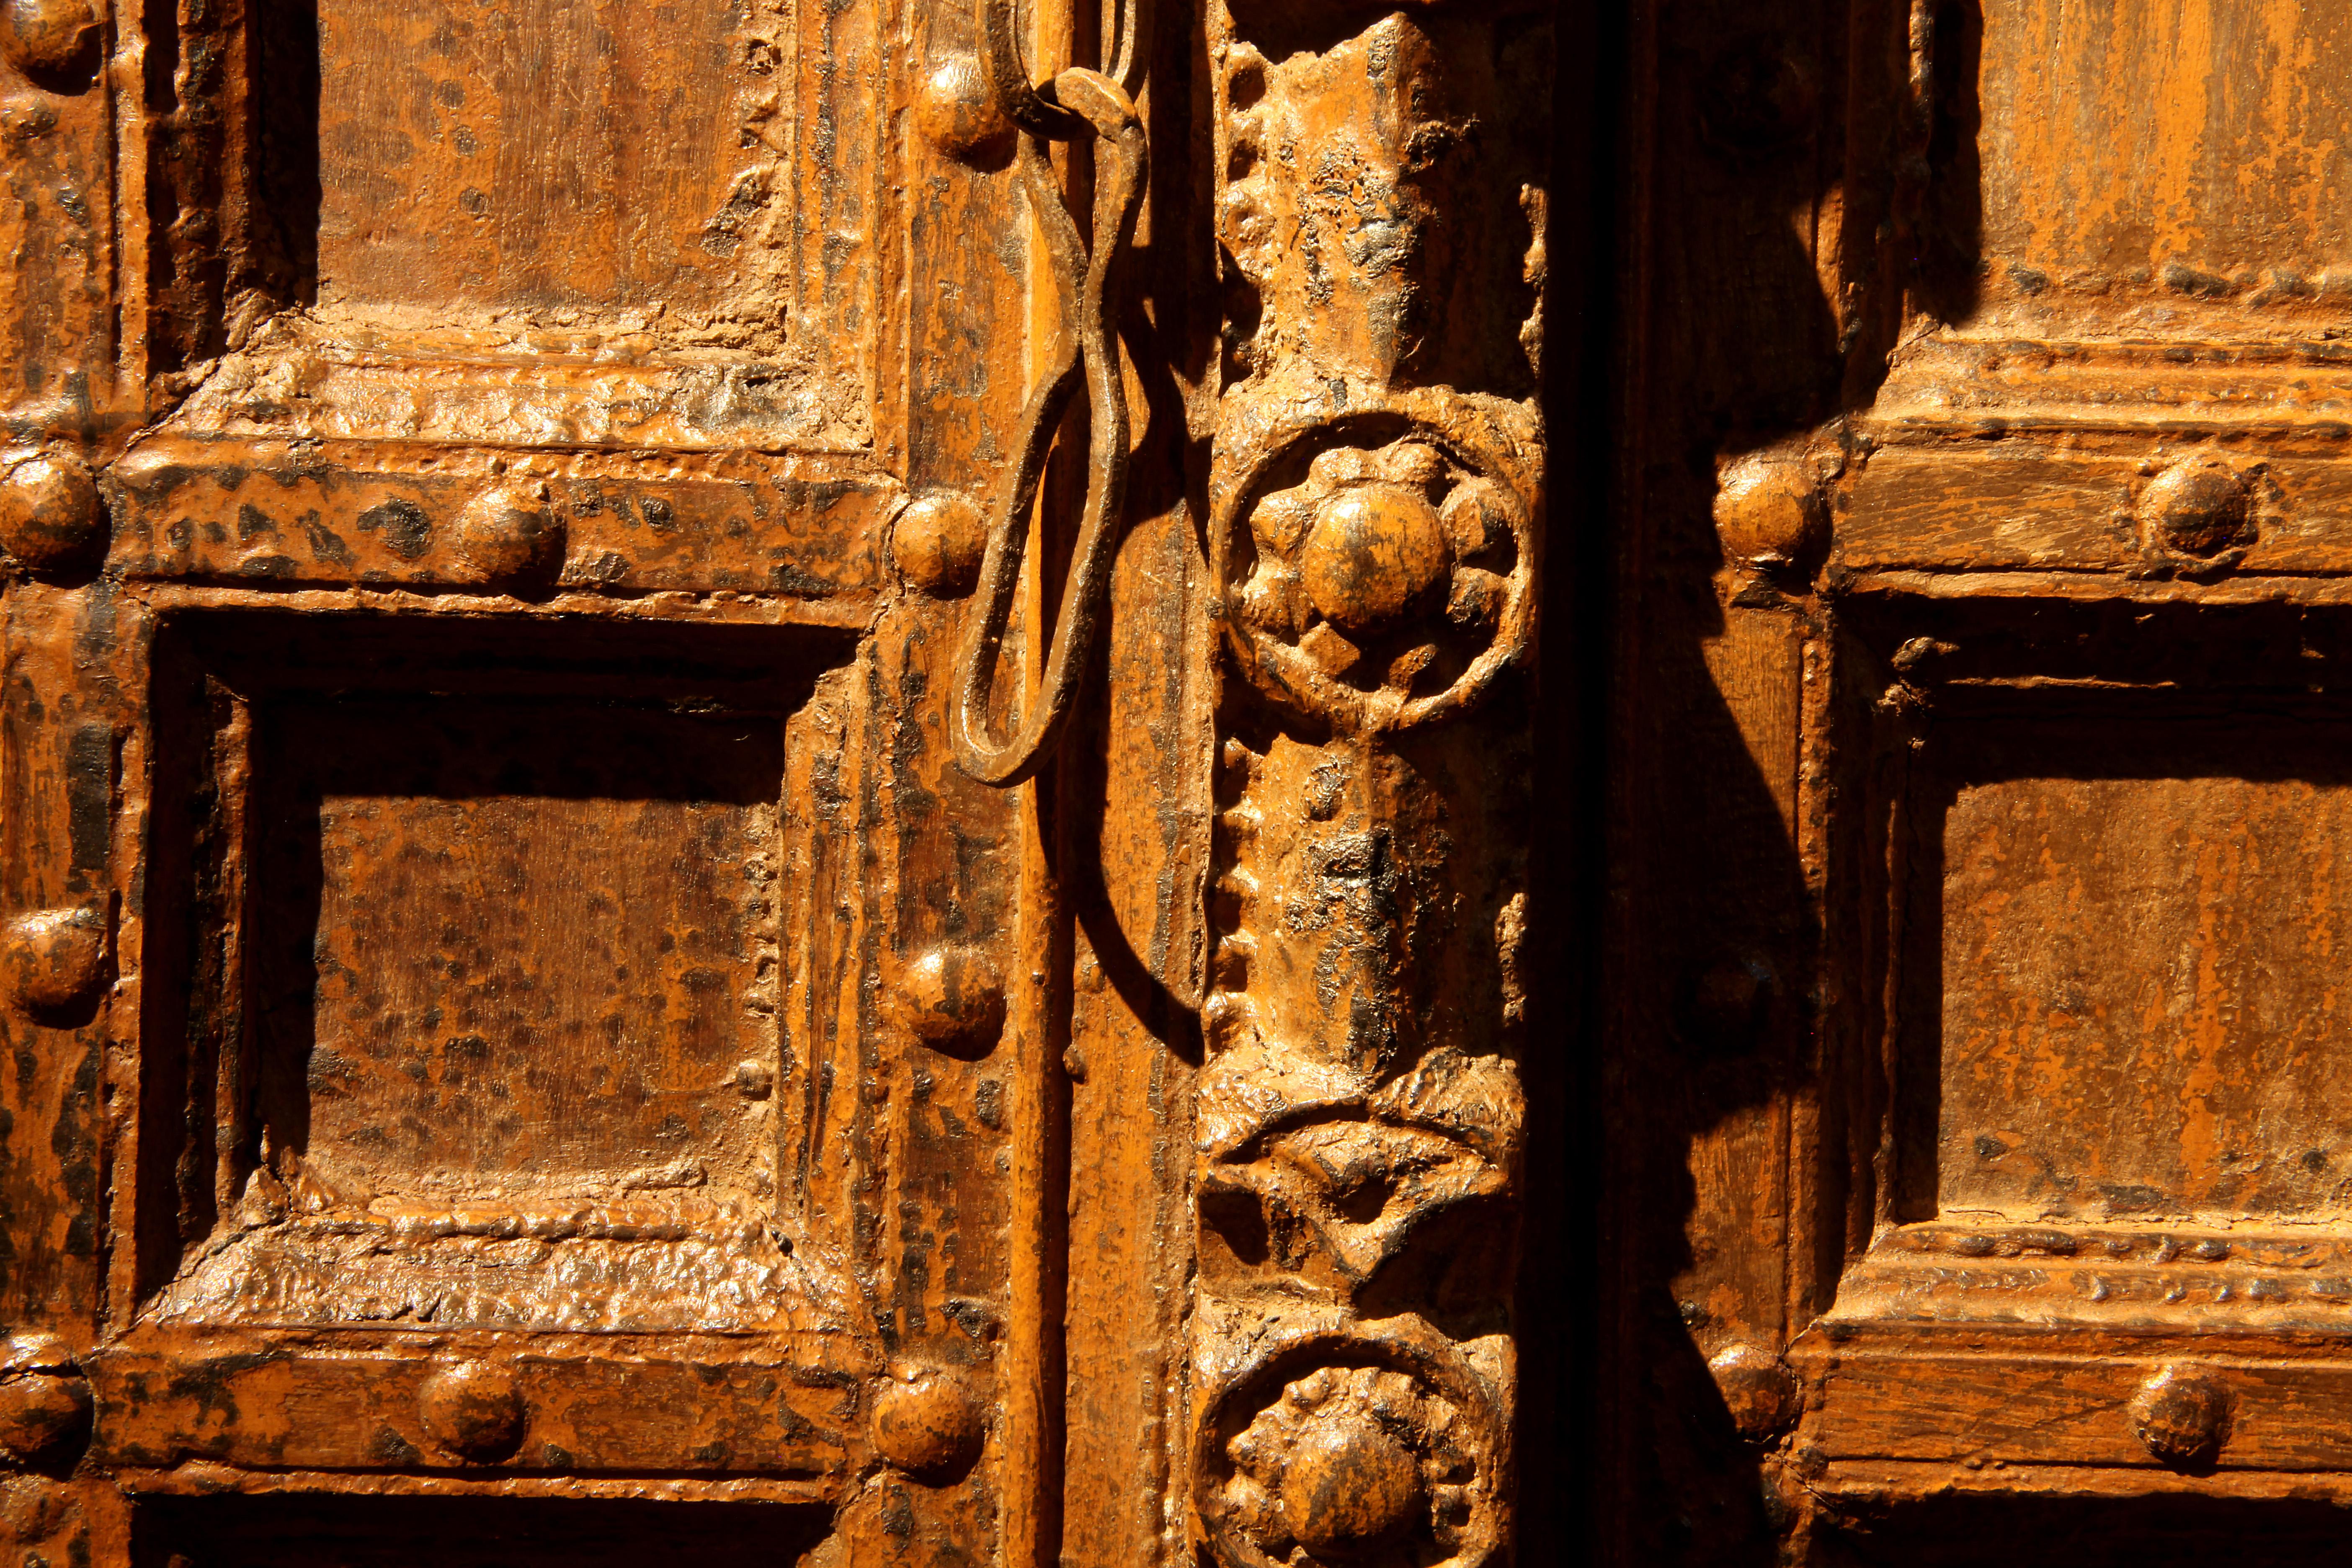 indian carved doors